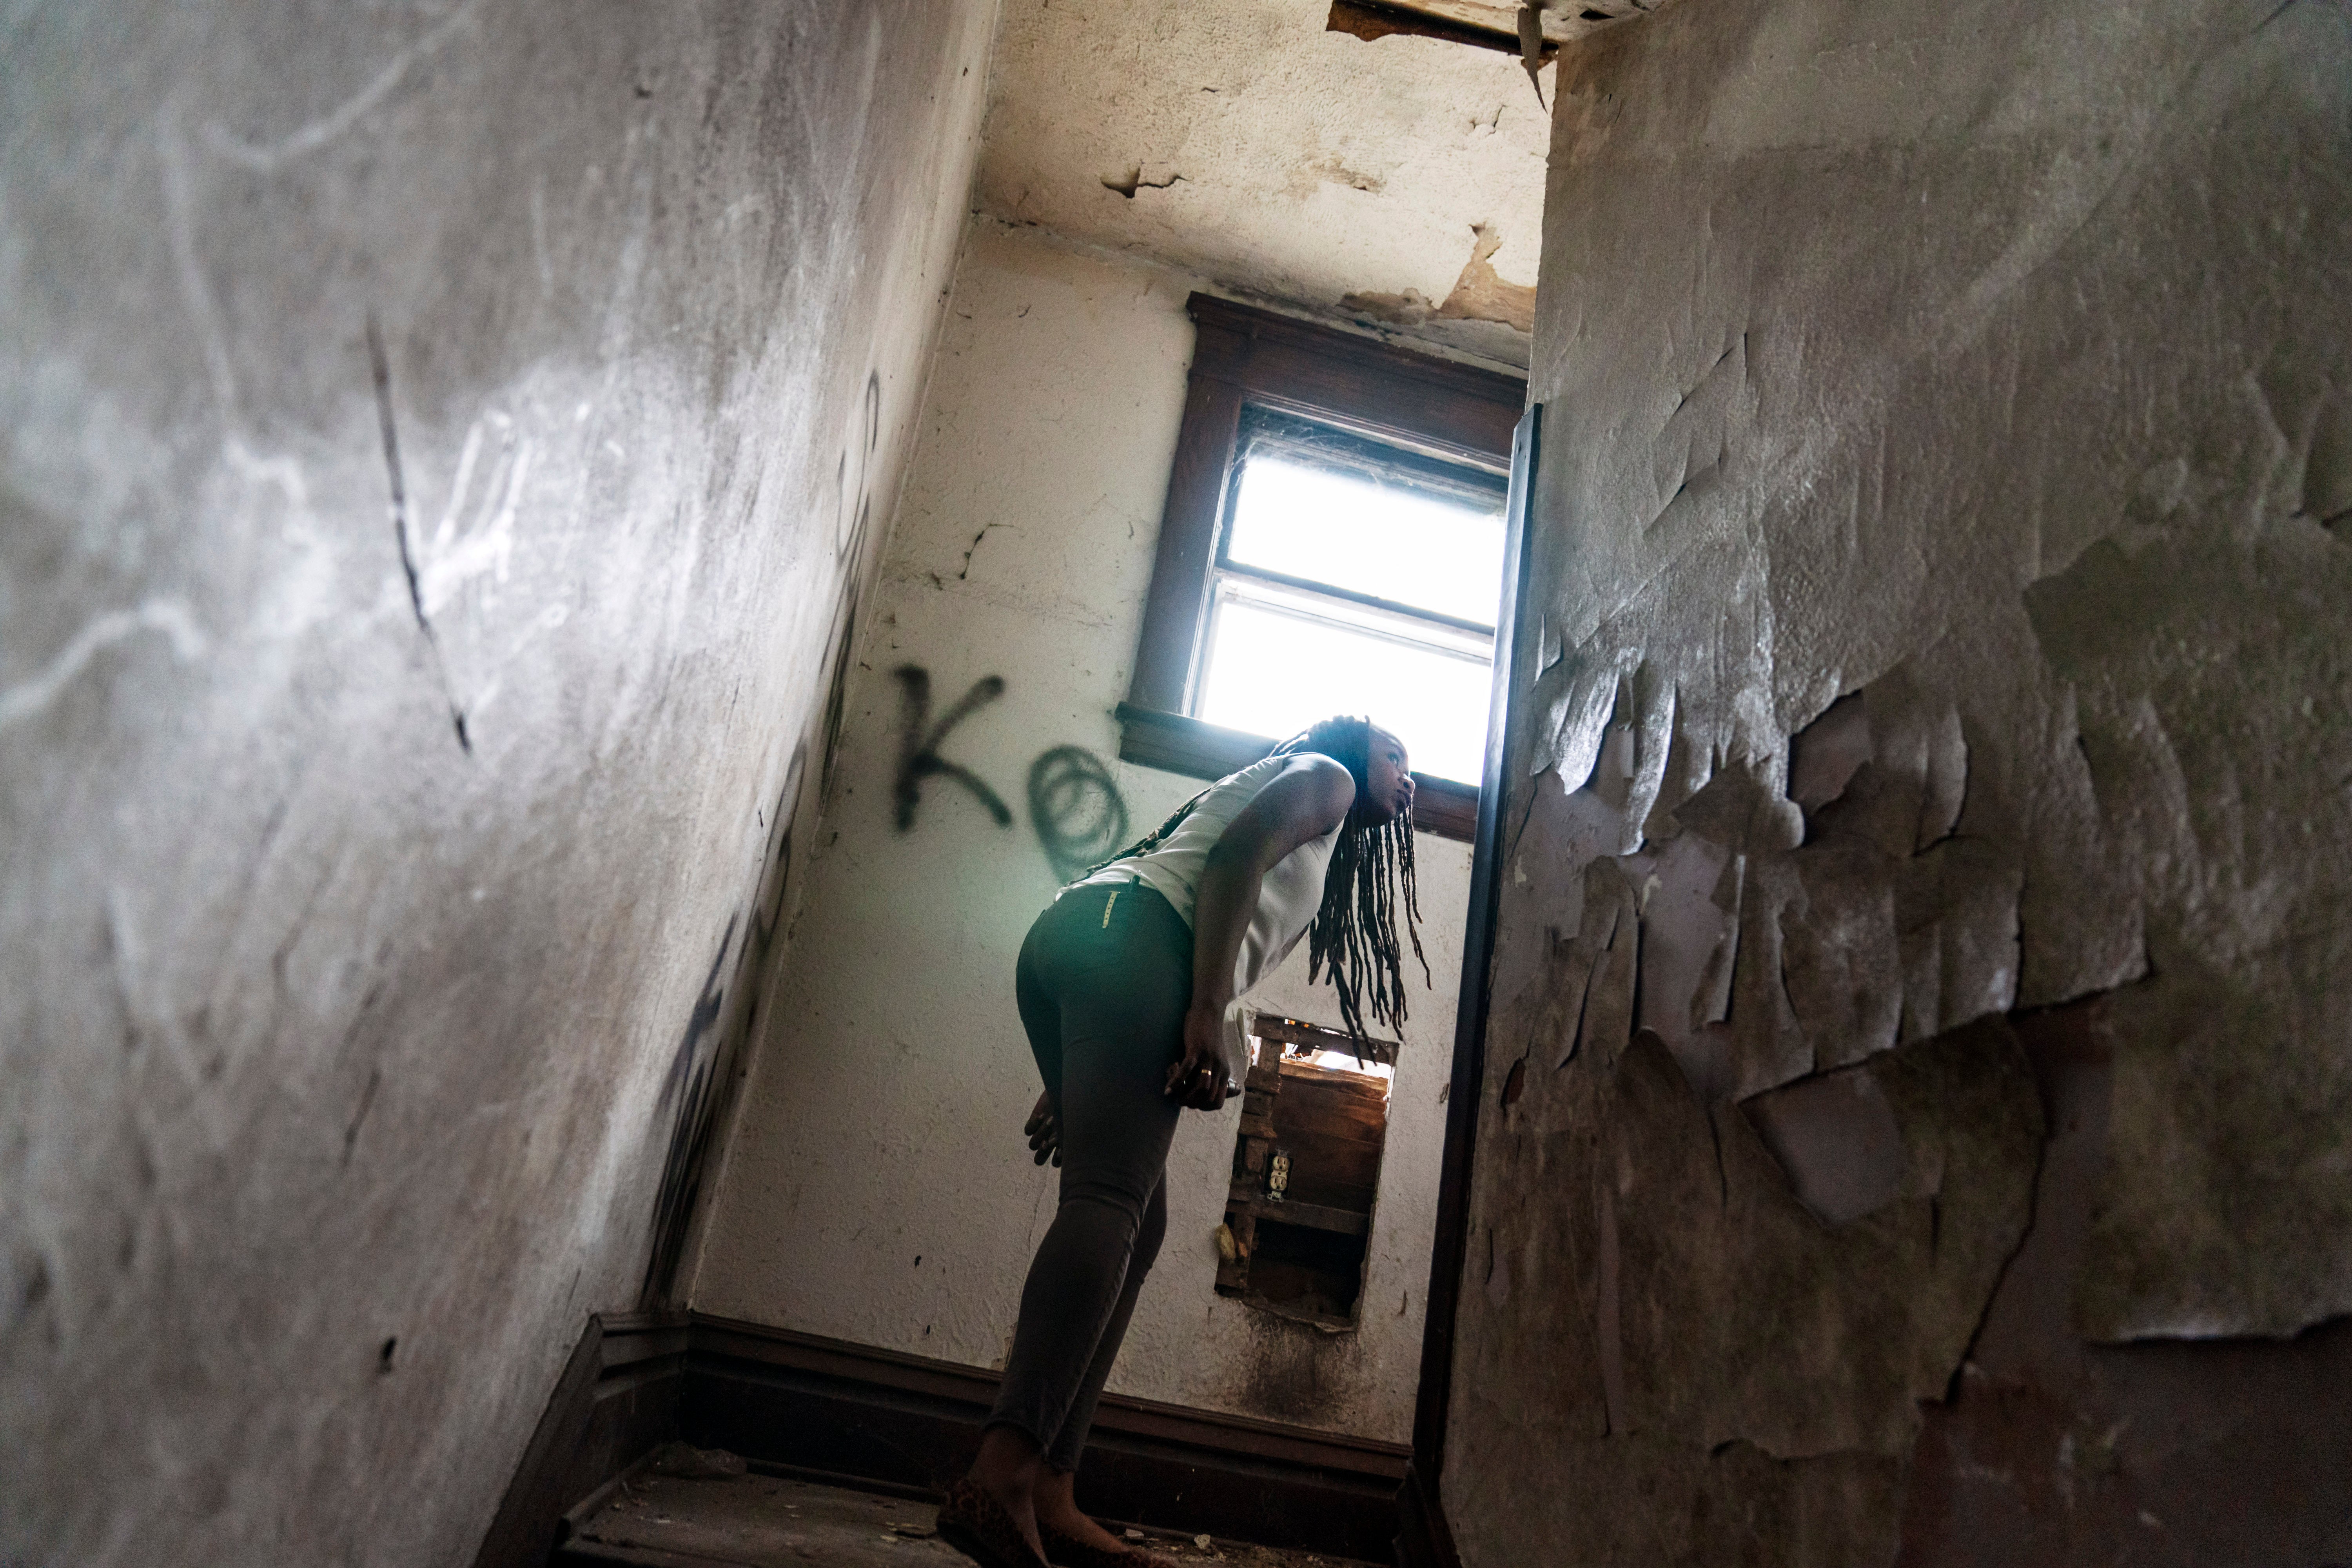 An overdose response team looks around an abandoned home in West Virginia